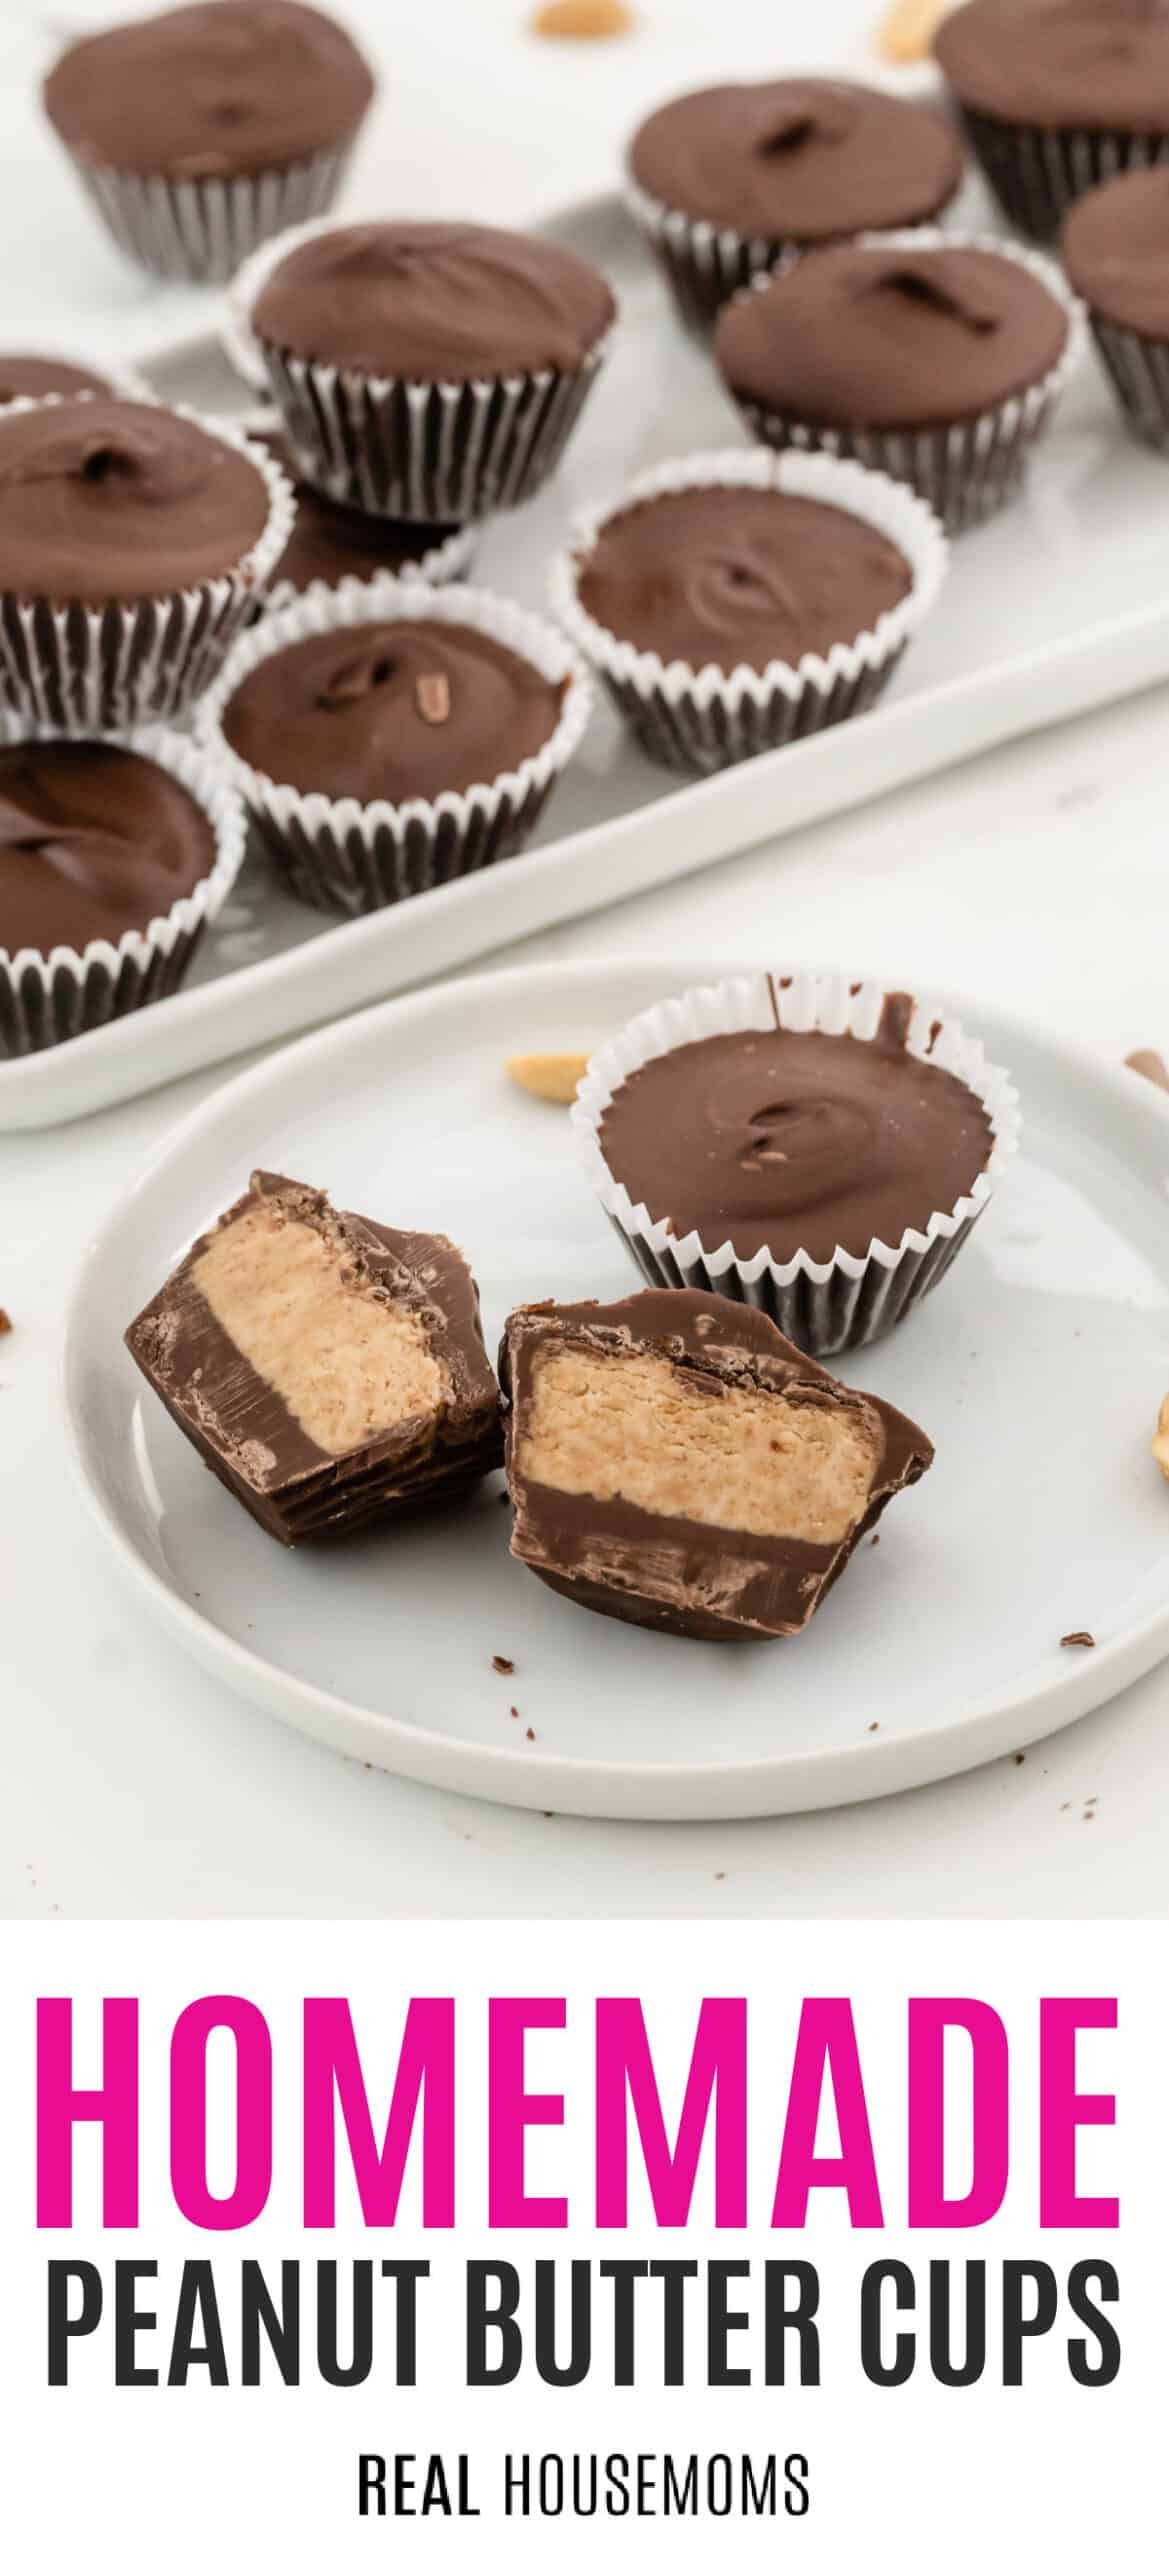 homemade peanut butter cups stacked up on a platter with one cut in half to show filling with recipe name at bottom